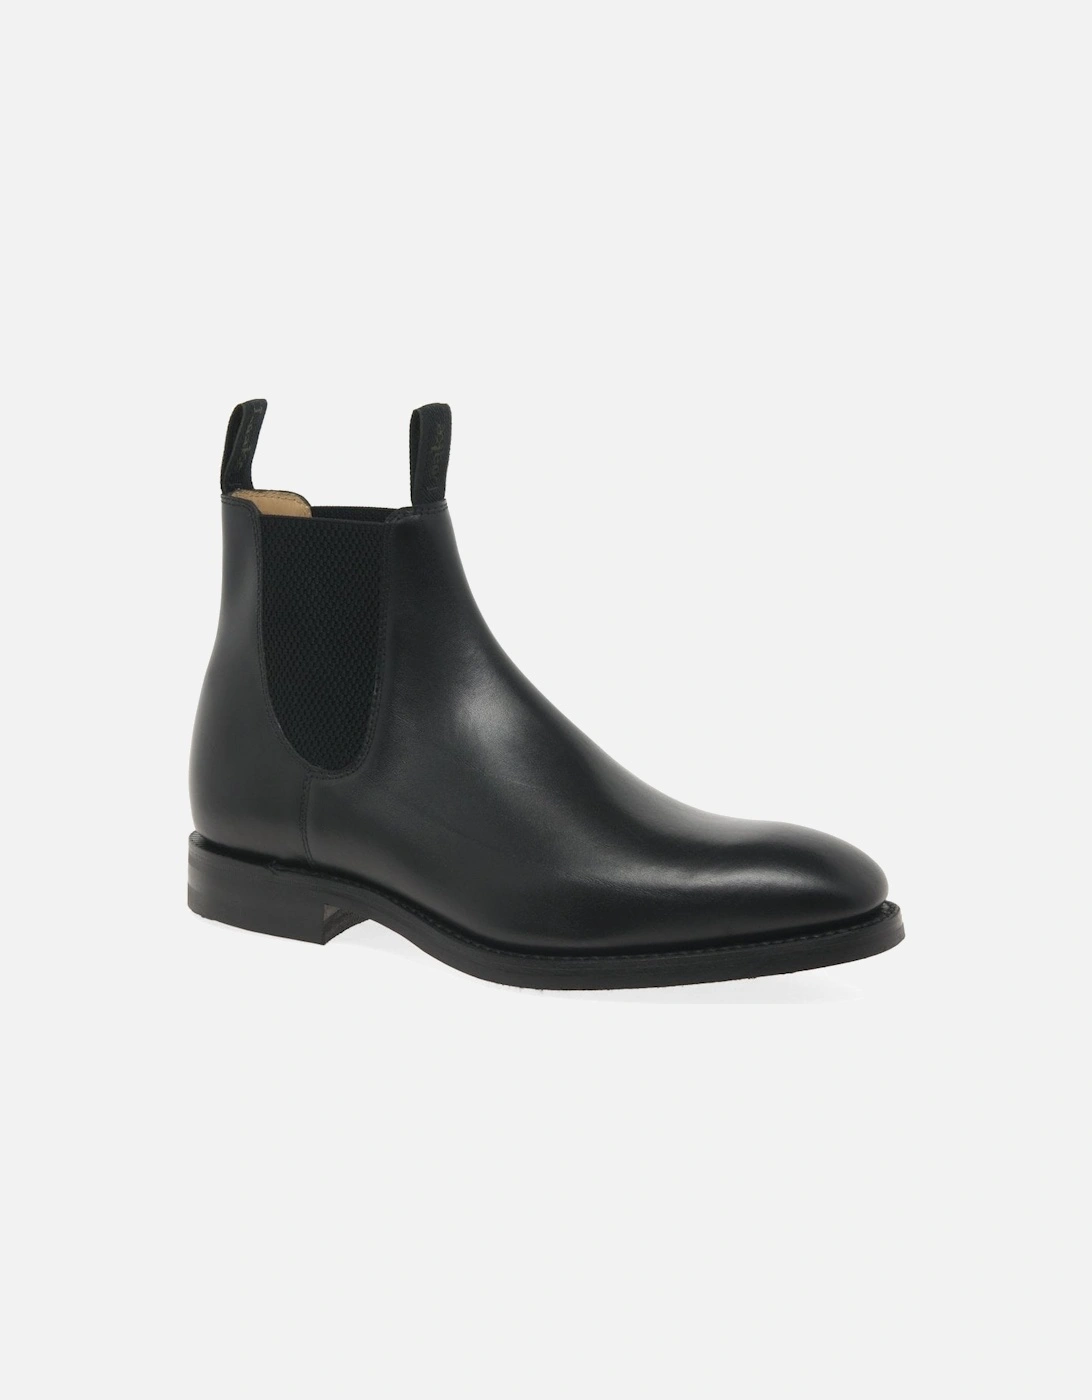 Chatsworth Mens Classic Chelsea Boots, 9 of 8